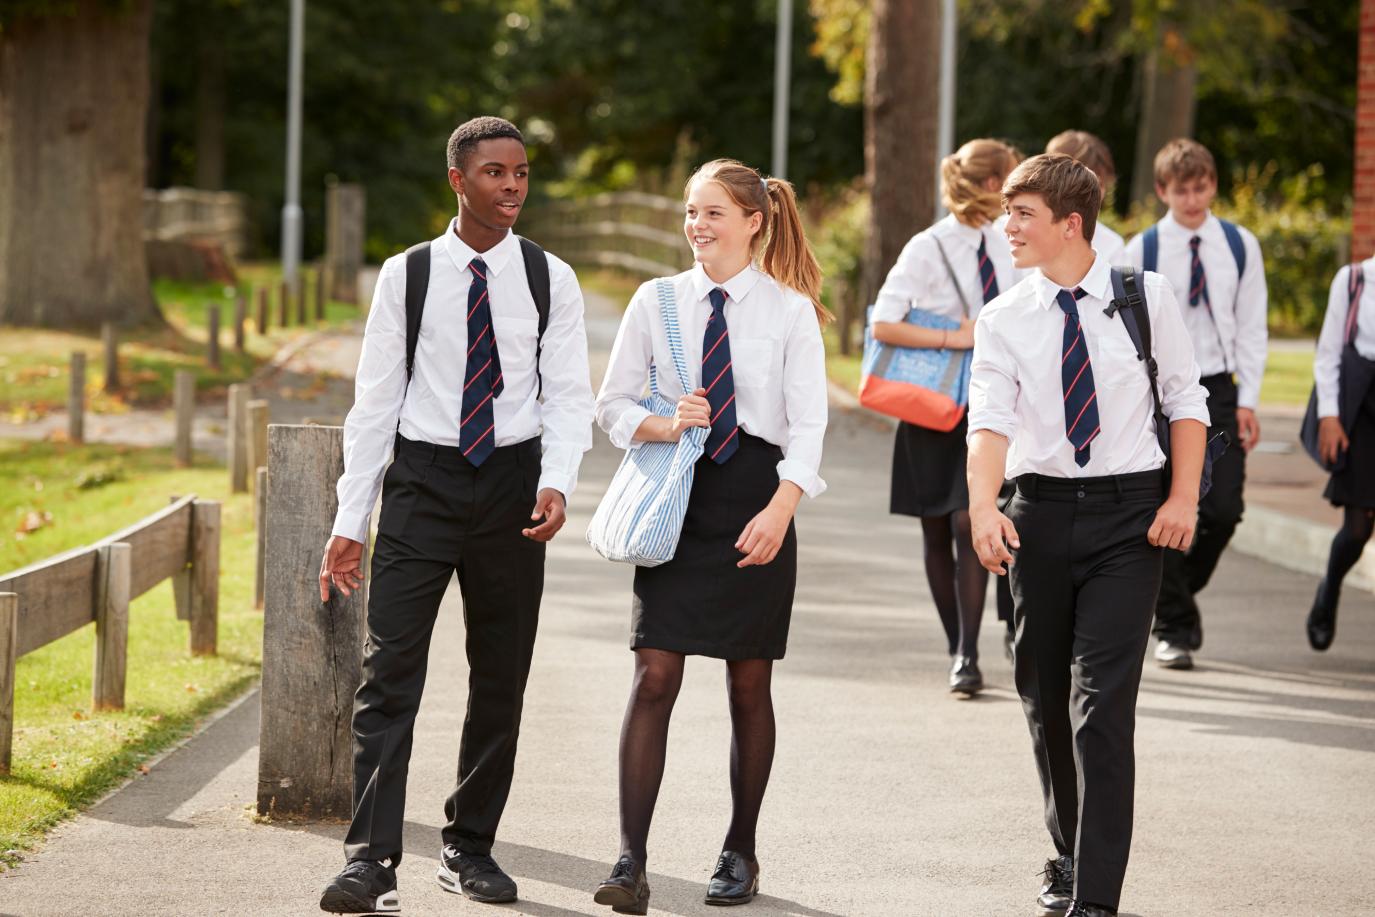 Group of teenagers in school uniform walking down a path together